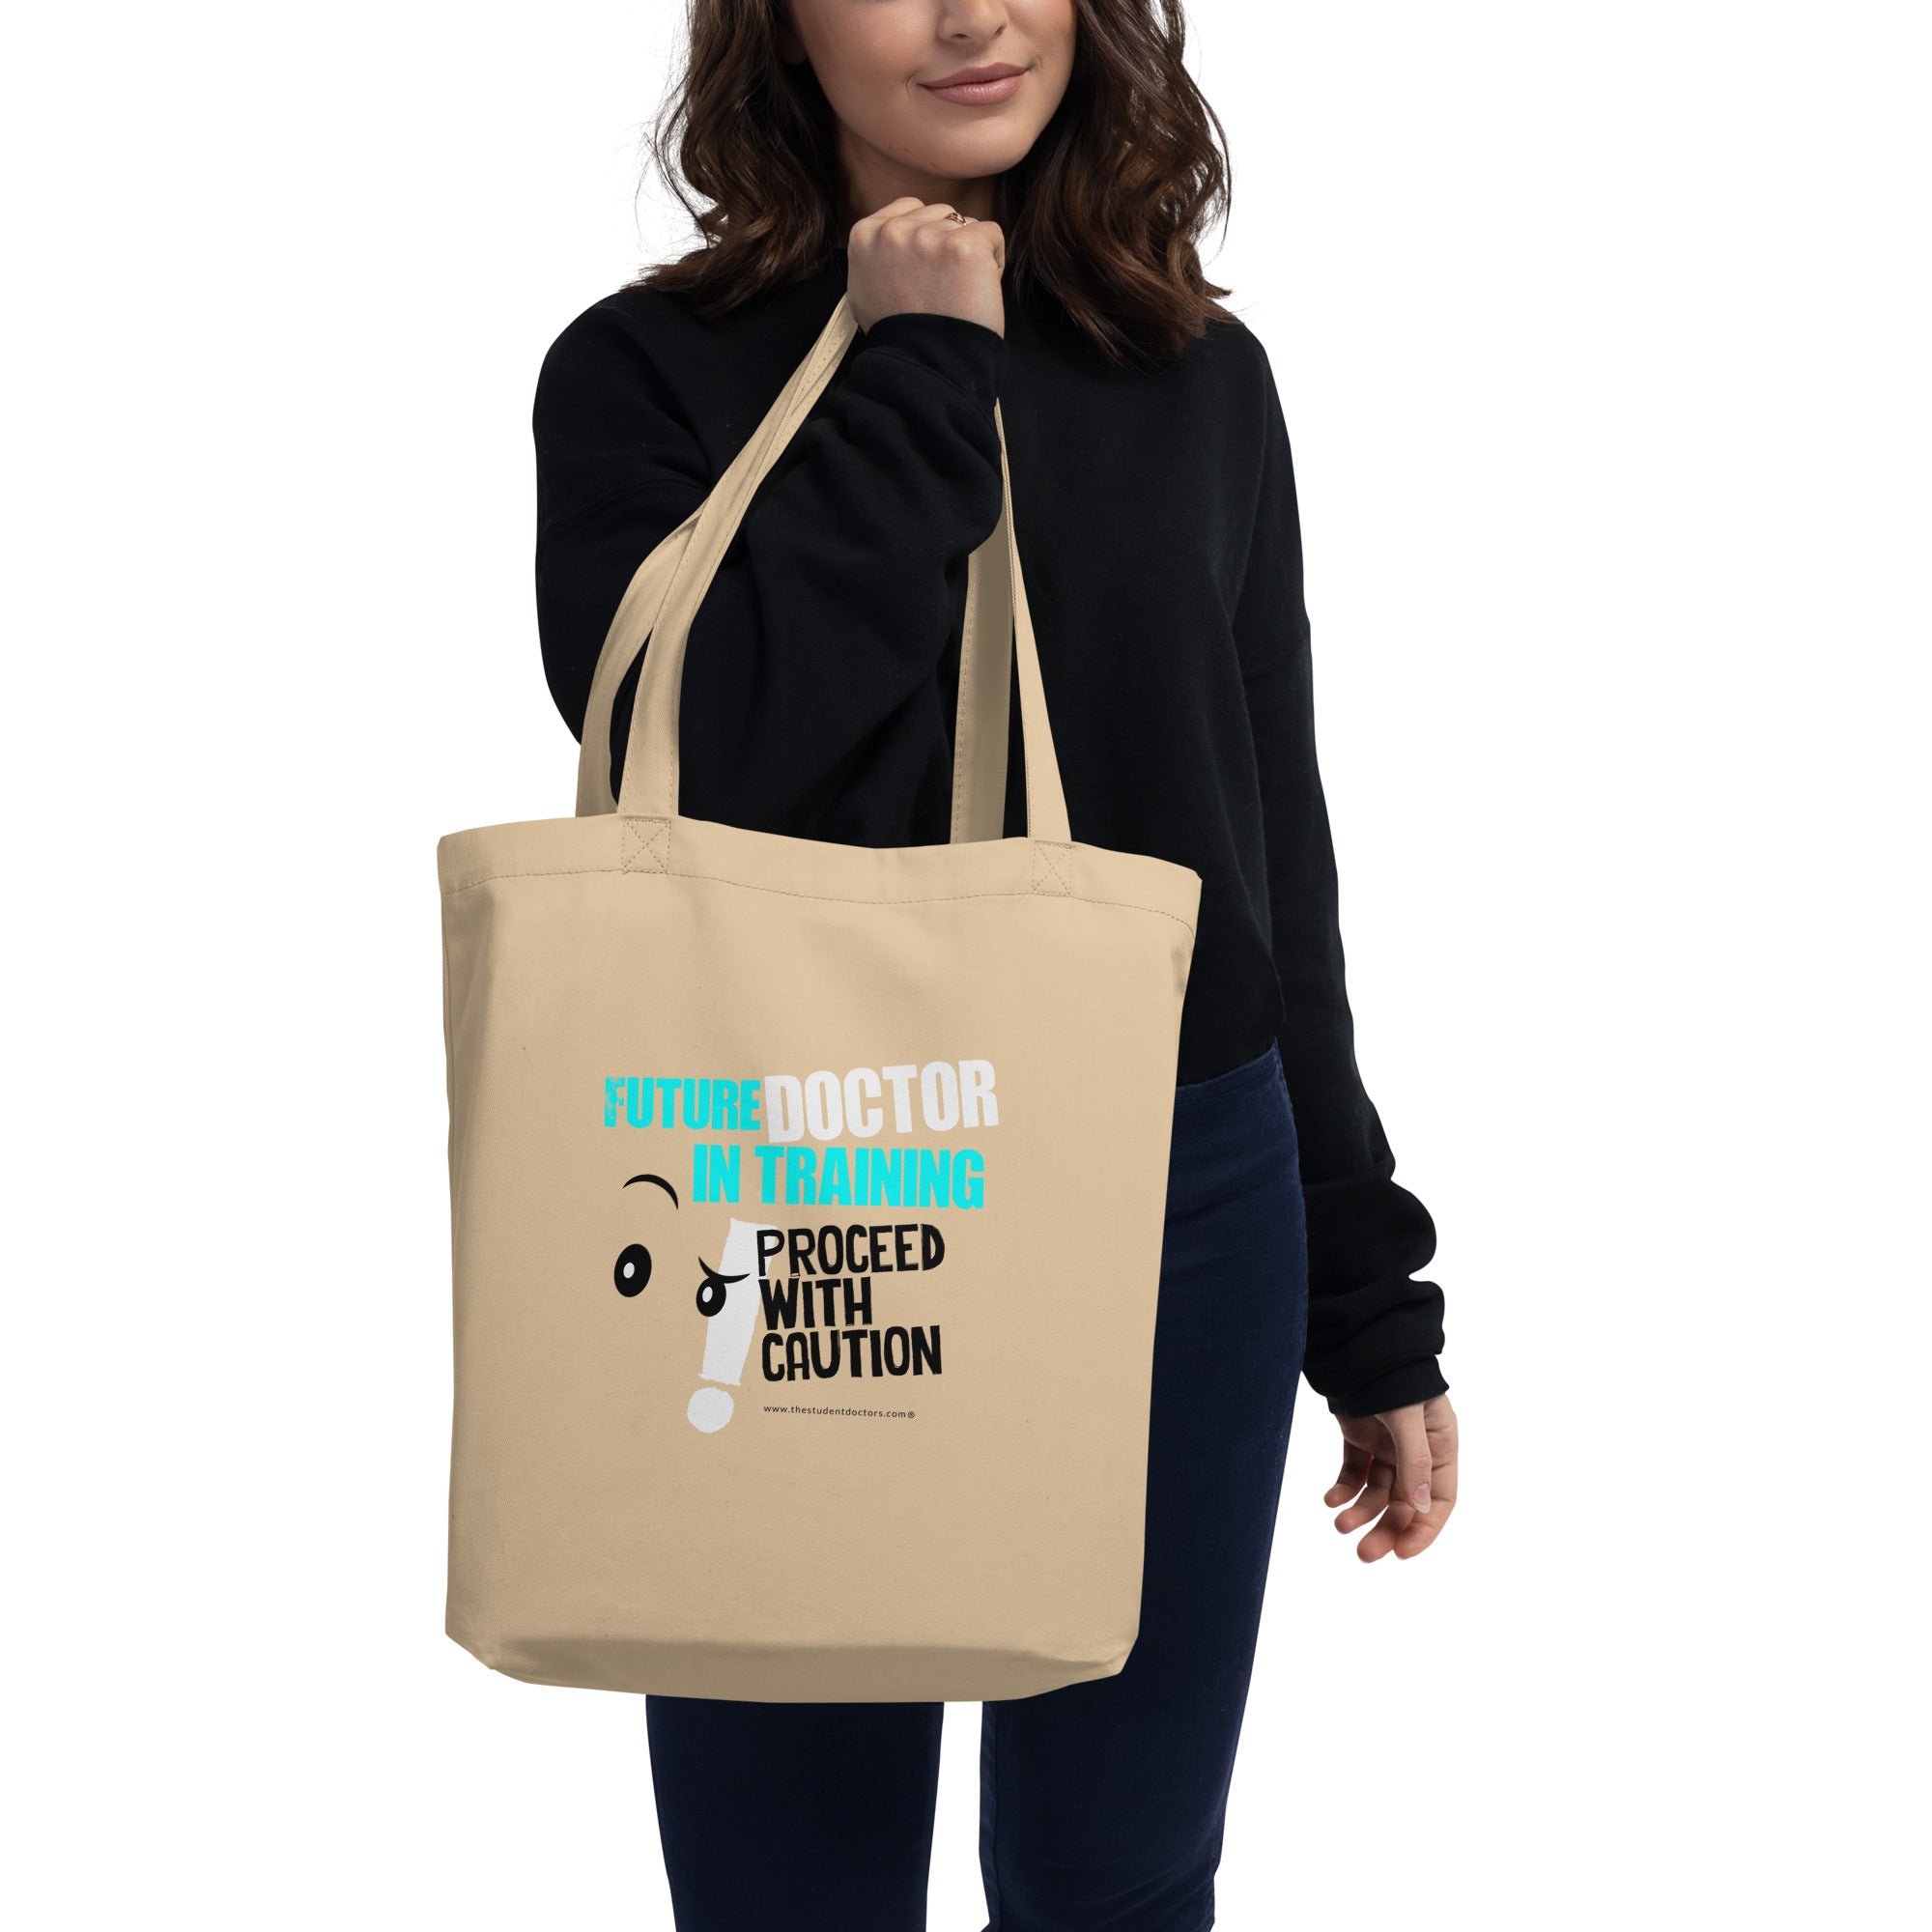 Student Doctor “DIT” Eco Tote Bag